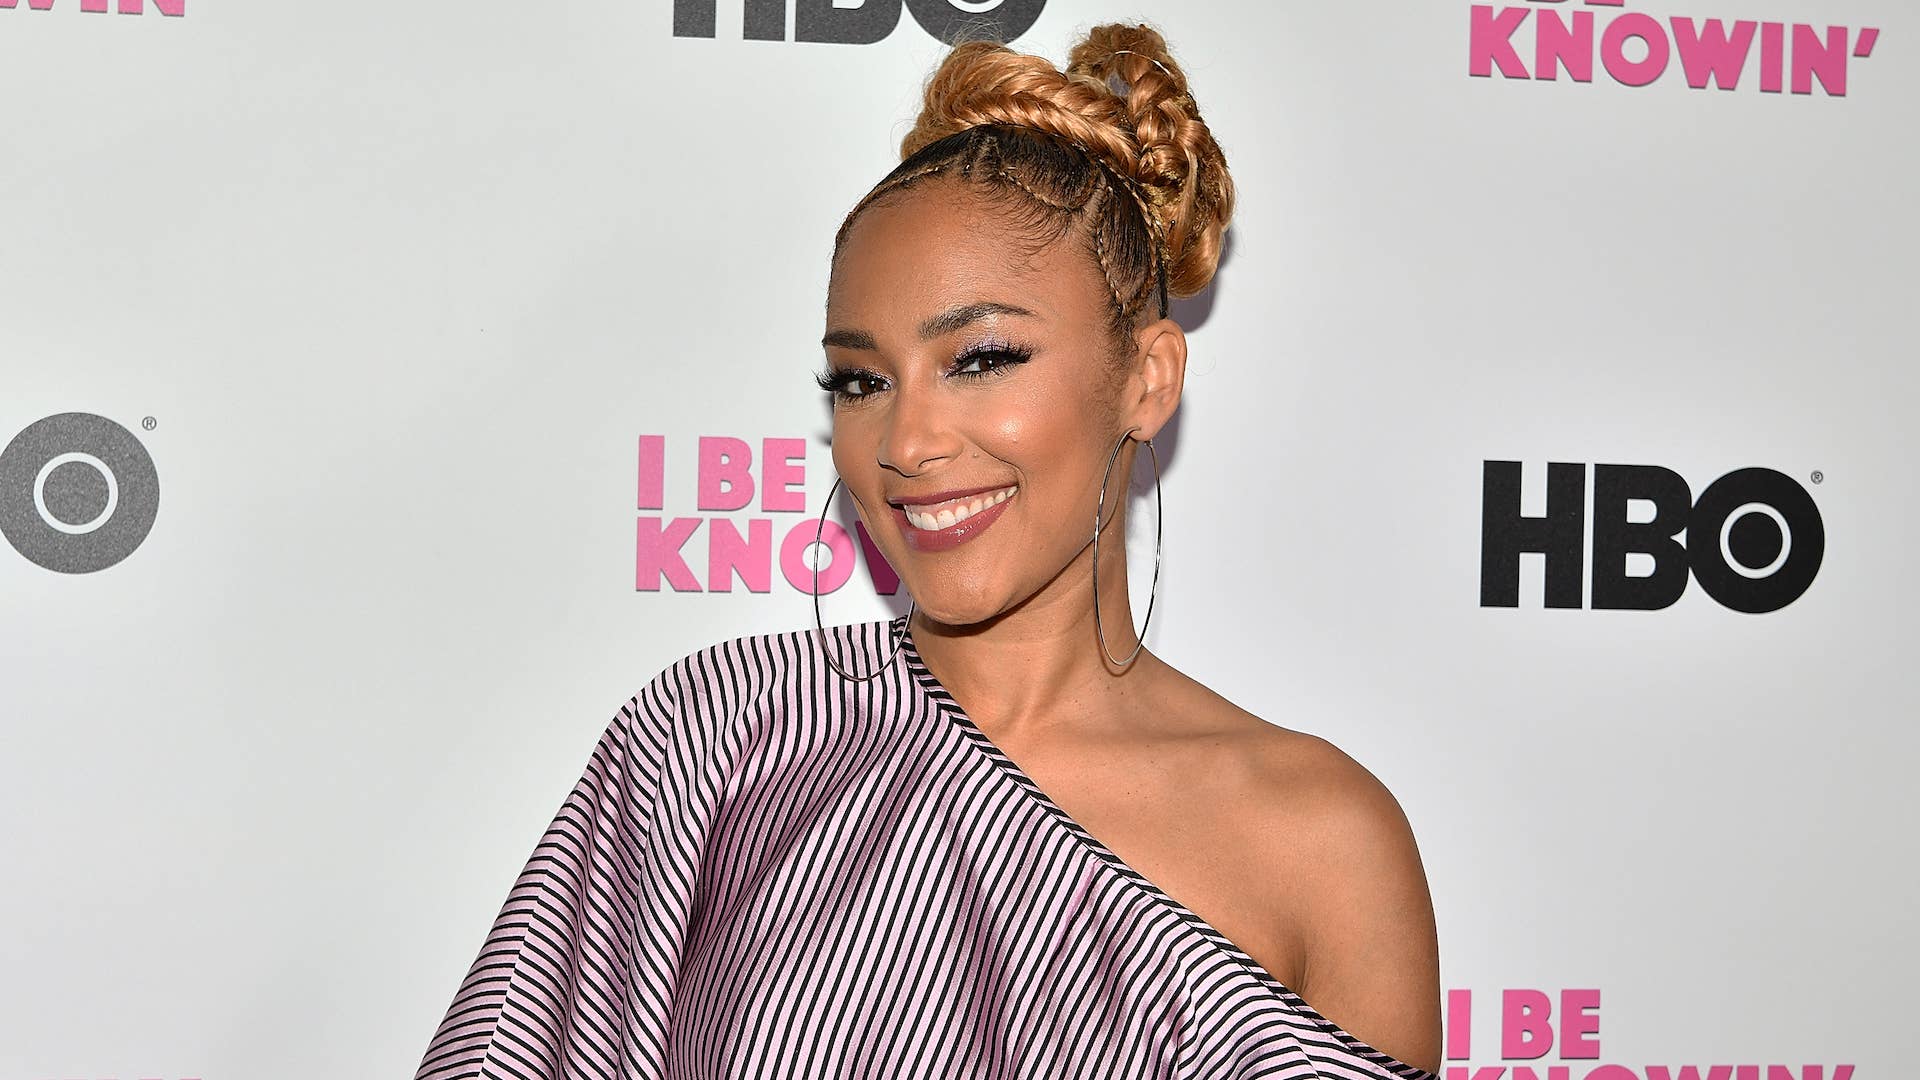 Amanda Seales photographed in NYC